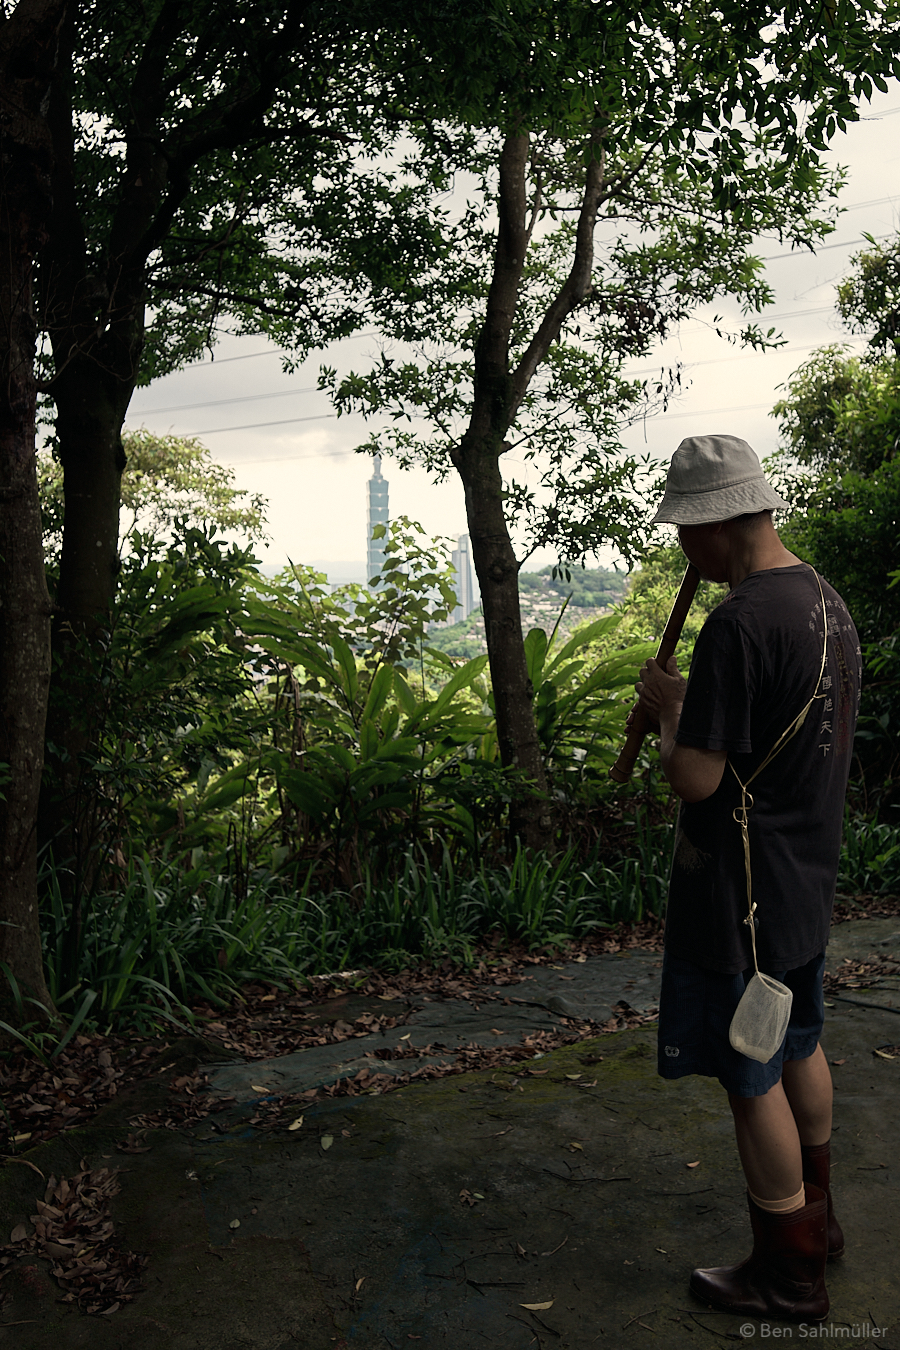 A Taiwanese man playing a flute in the woods. Taipei 101 can be seen in the background through some of the trees.